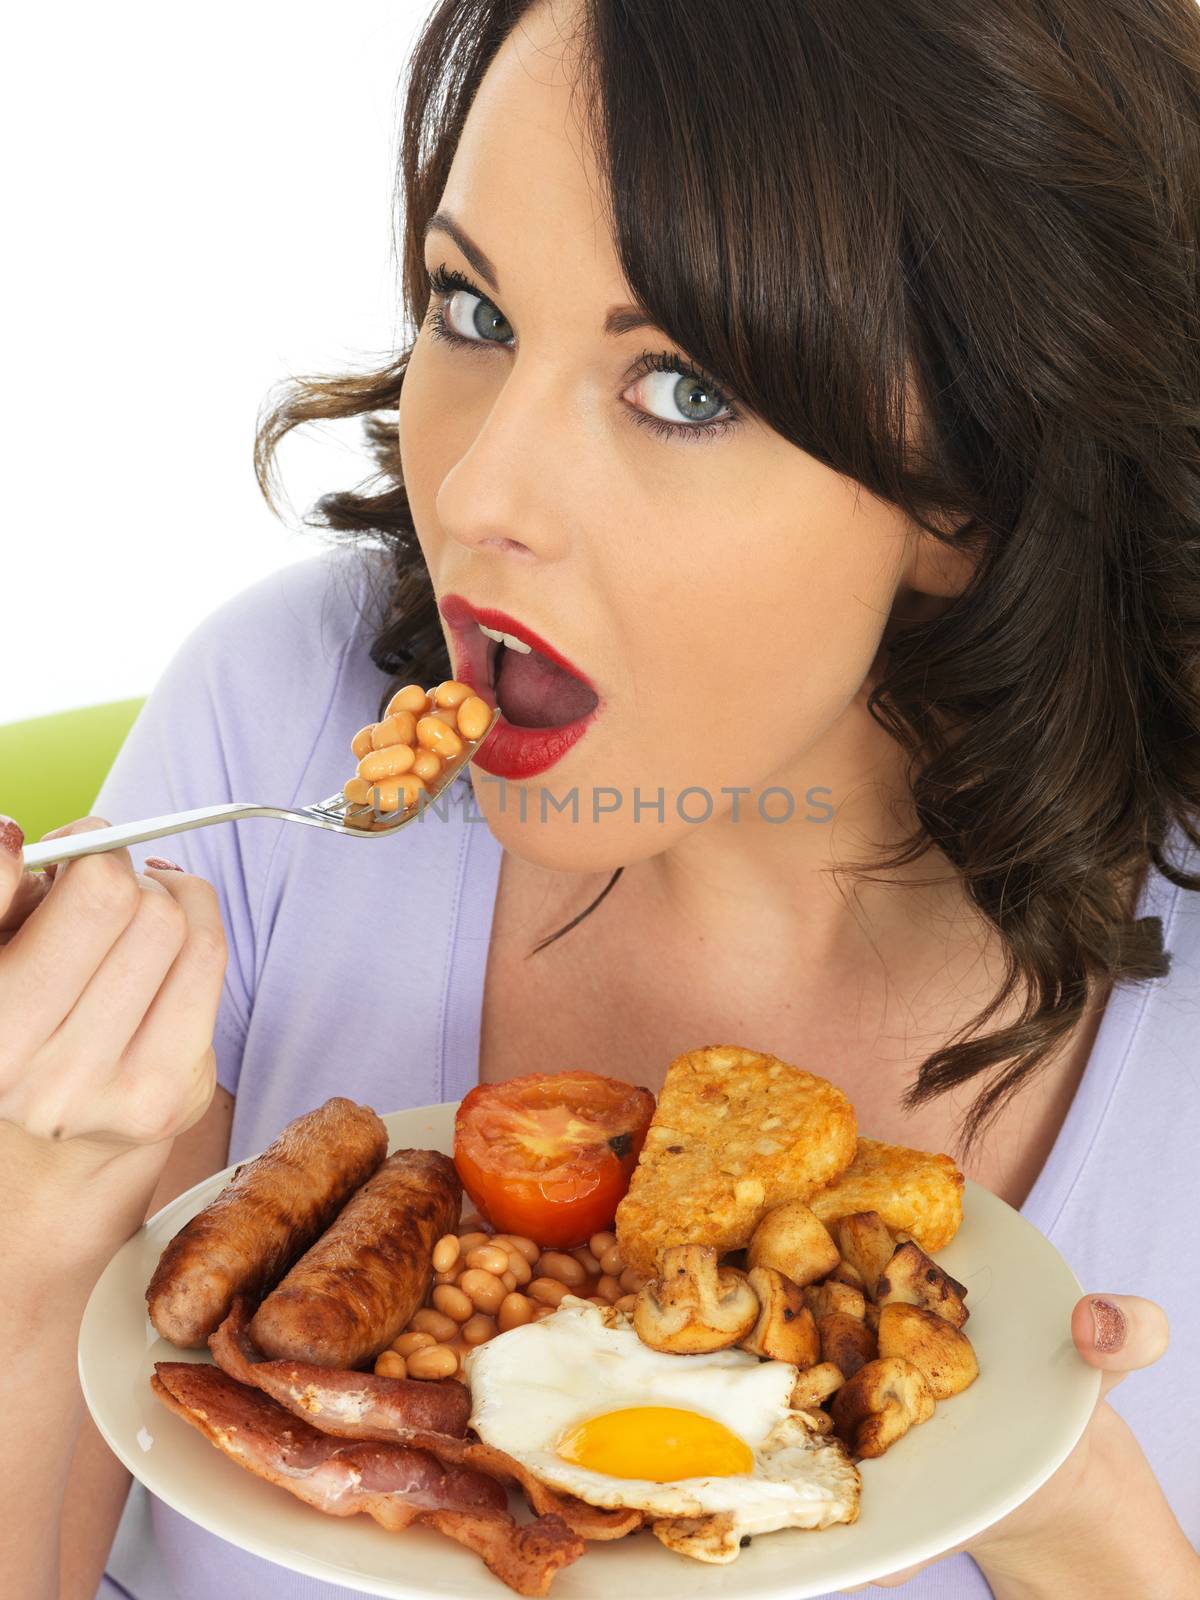 Young Attractive Woman Eating a Full English Breakfast